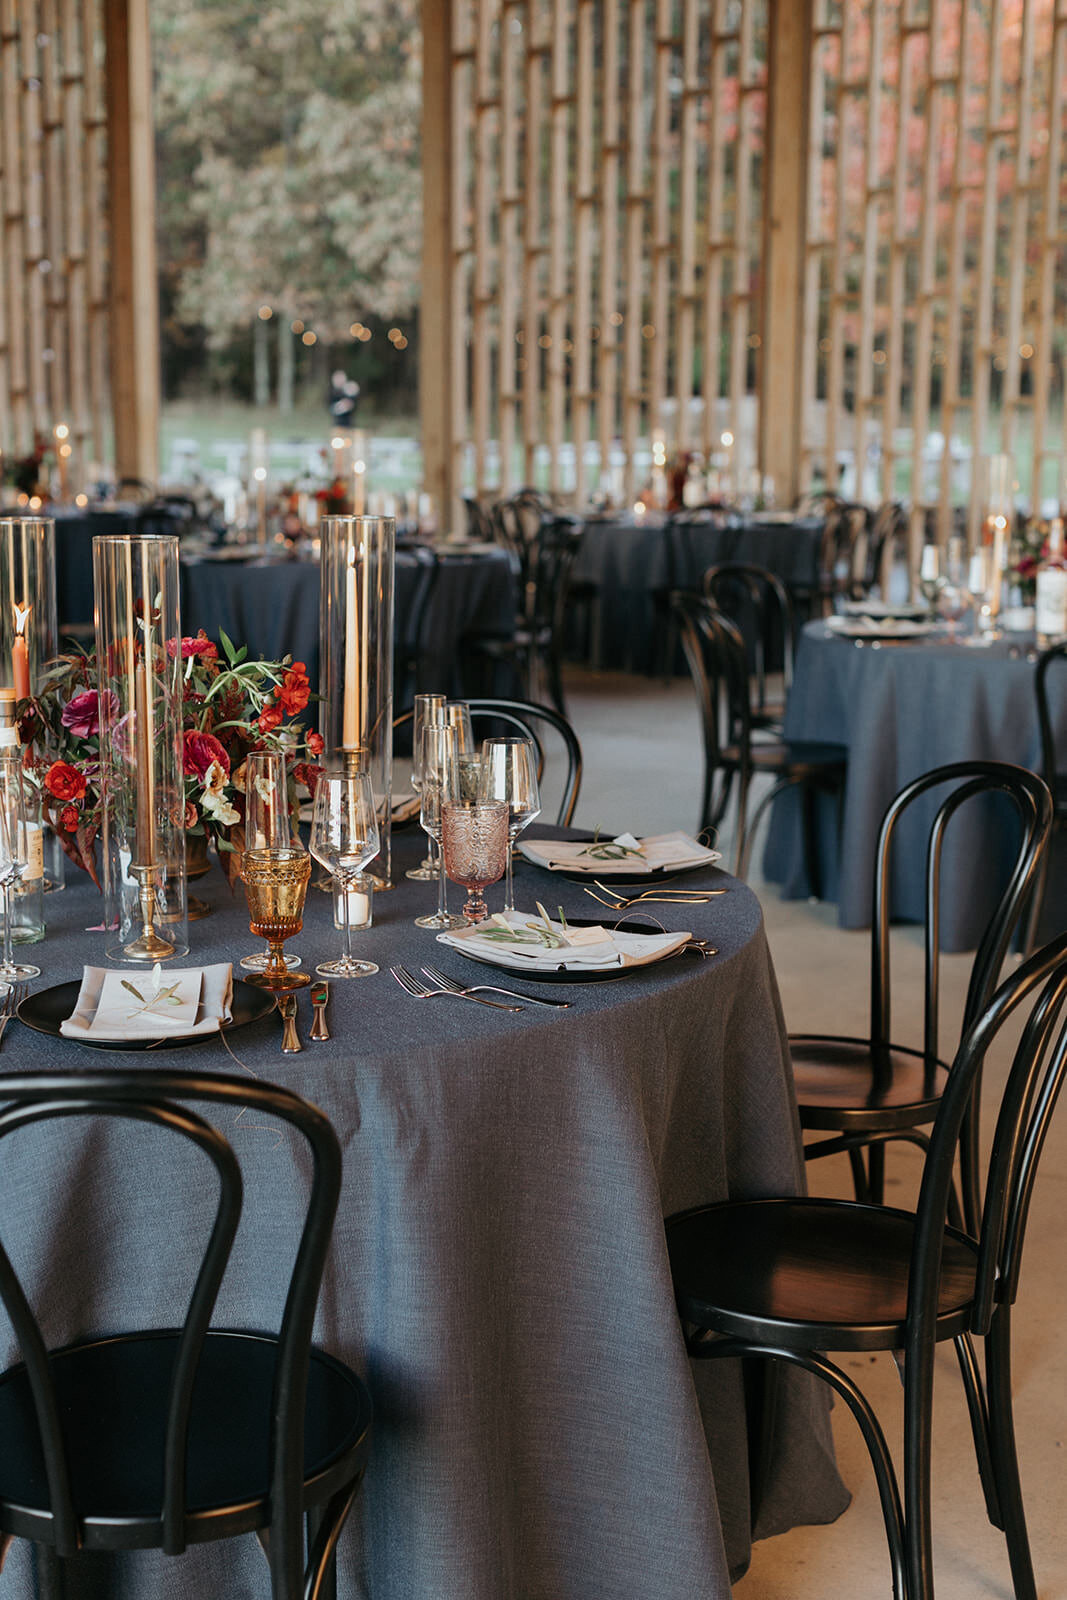 Hudson valley wedding venue with modern reception decor, gray round tables, black chairs, elegant amber accents with red and pink flowers